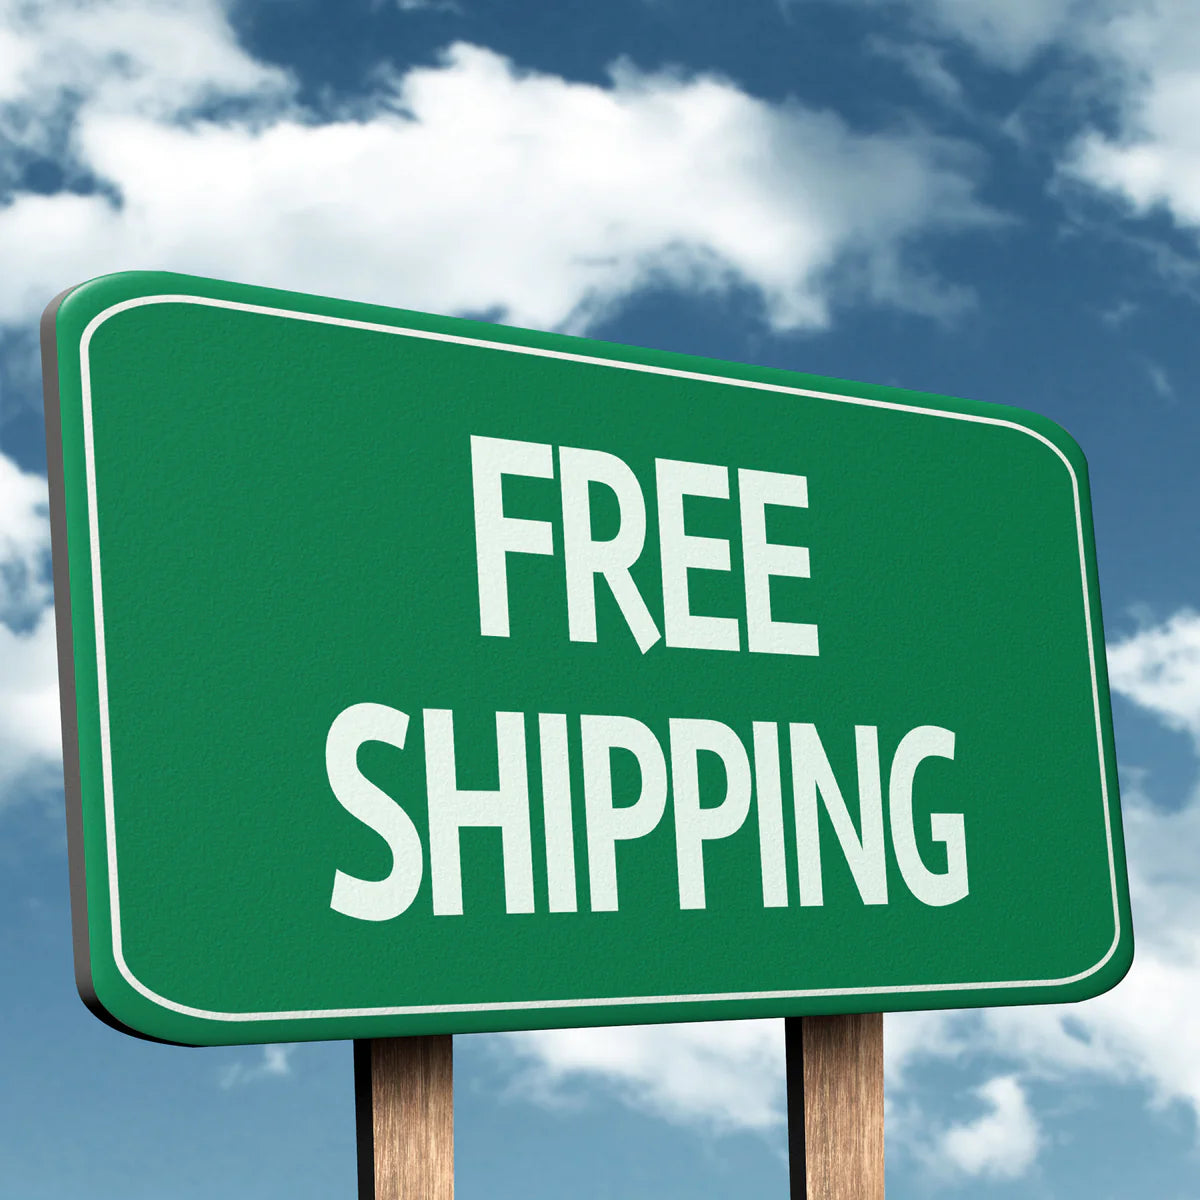 FAST AND FREE SHIPPING